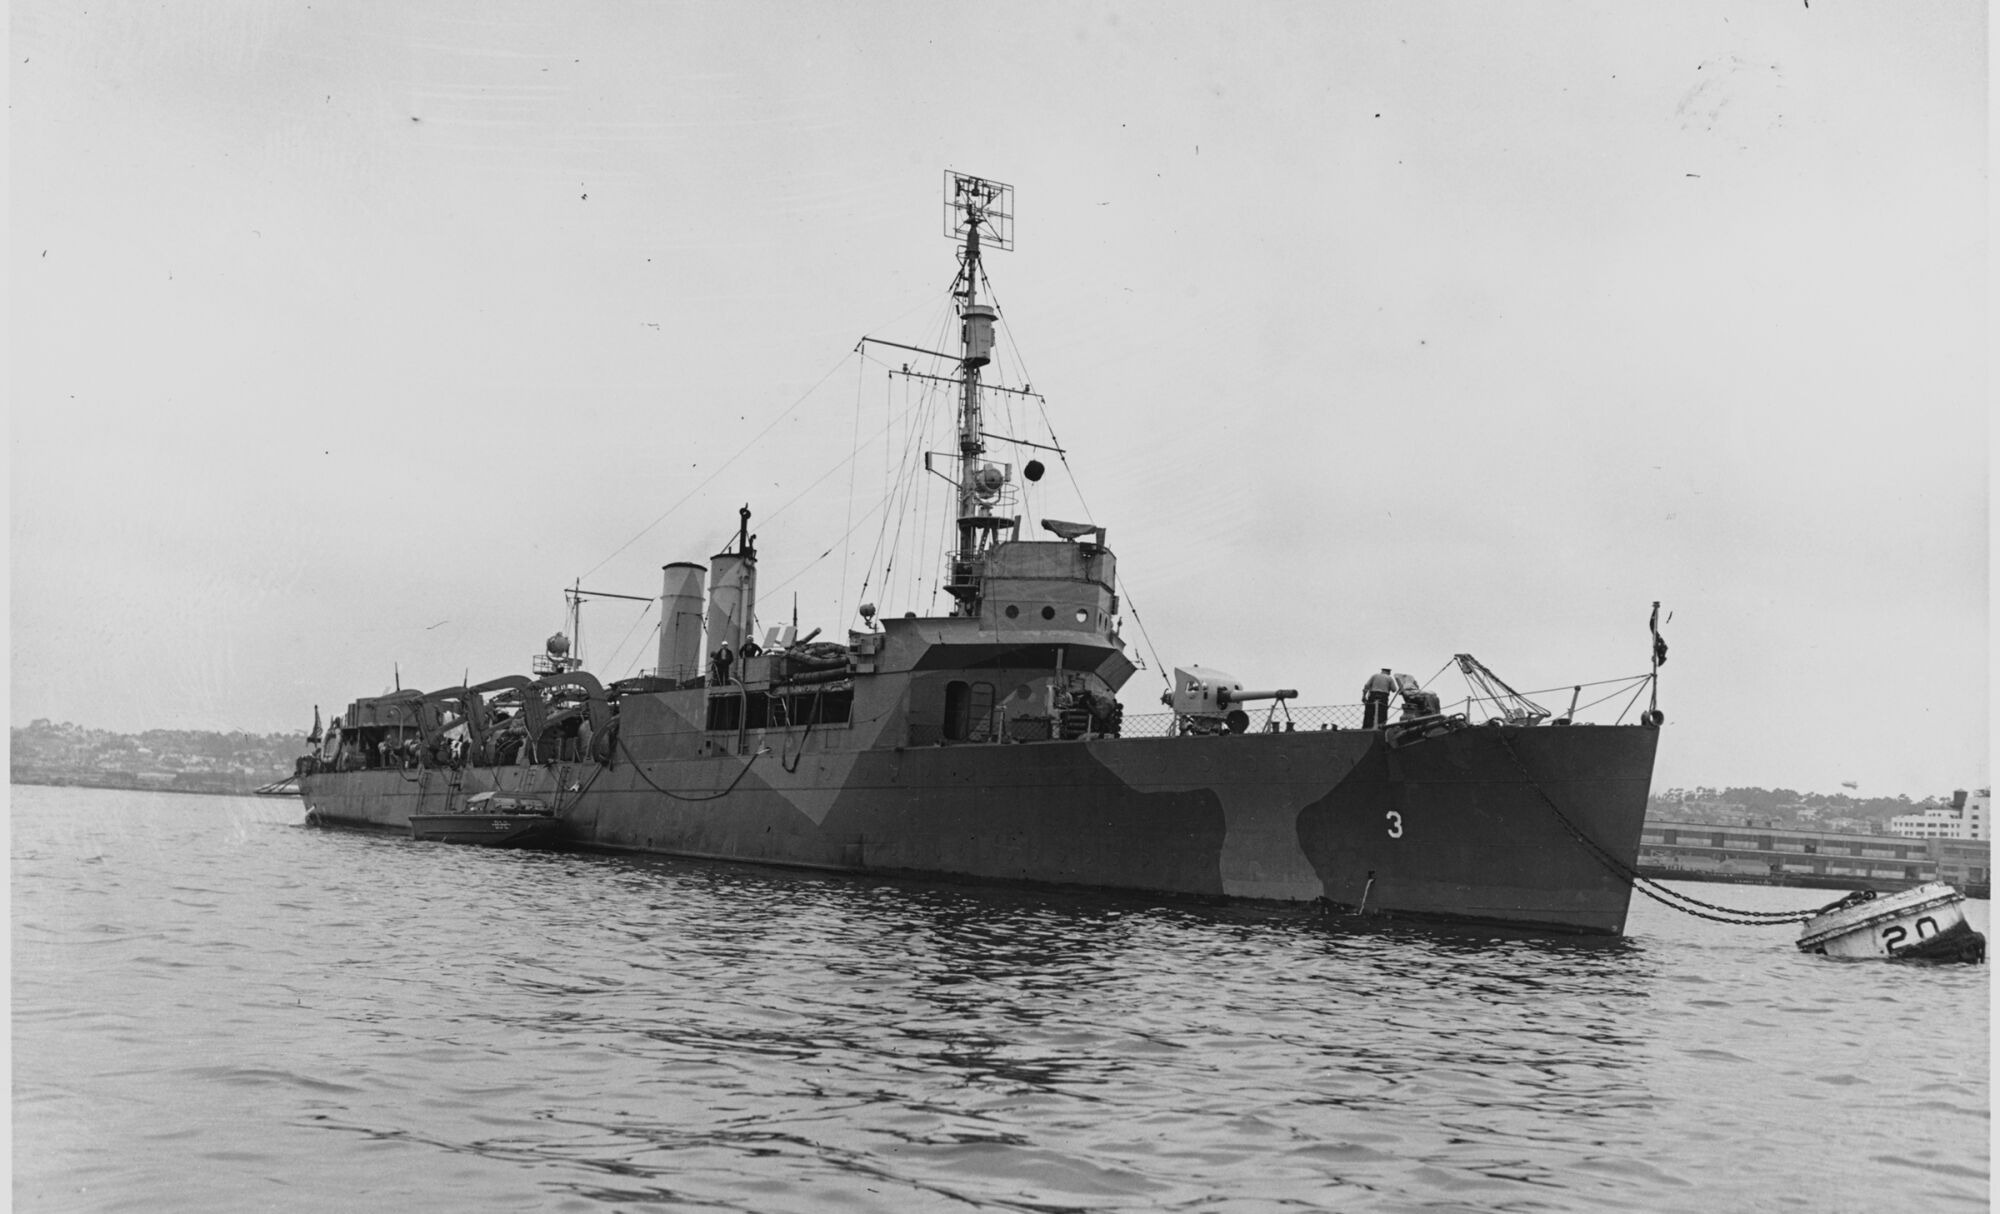 The destroyer-turned-transport U.S. Navy ship Gregory in port while painted in pattern camouflage.